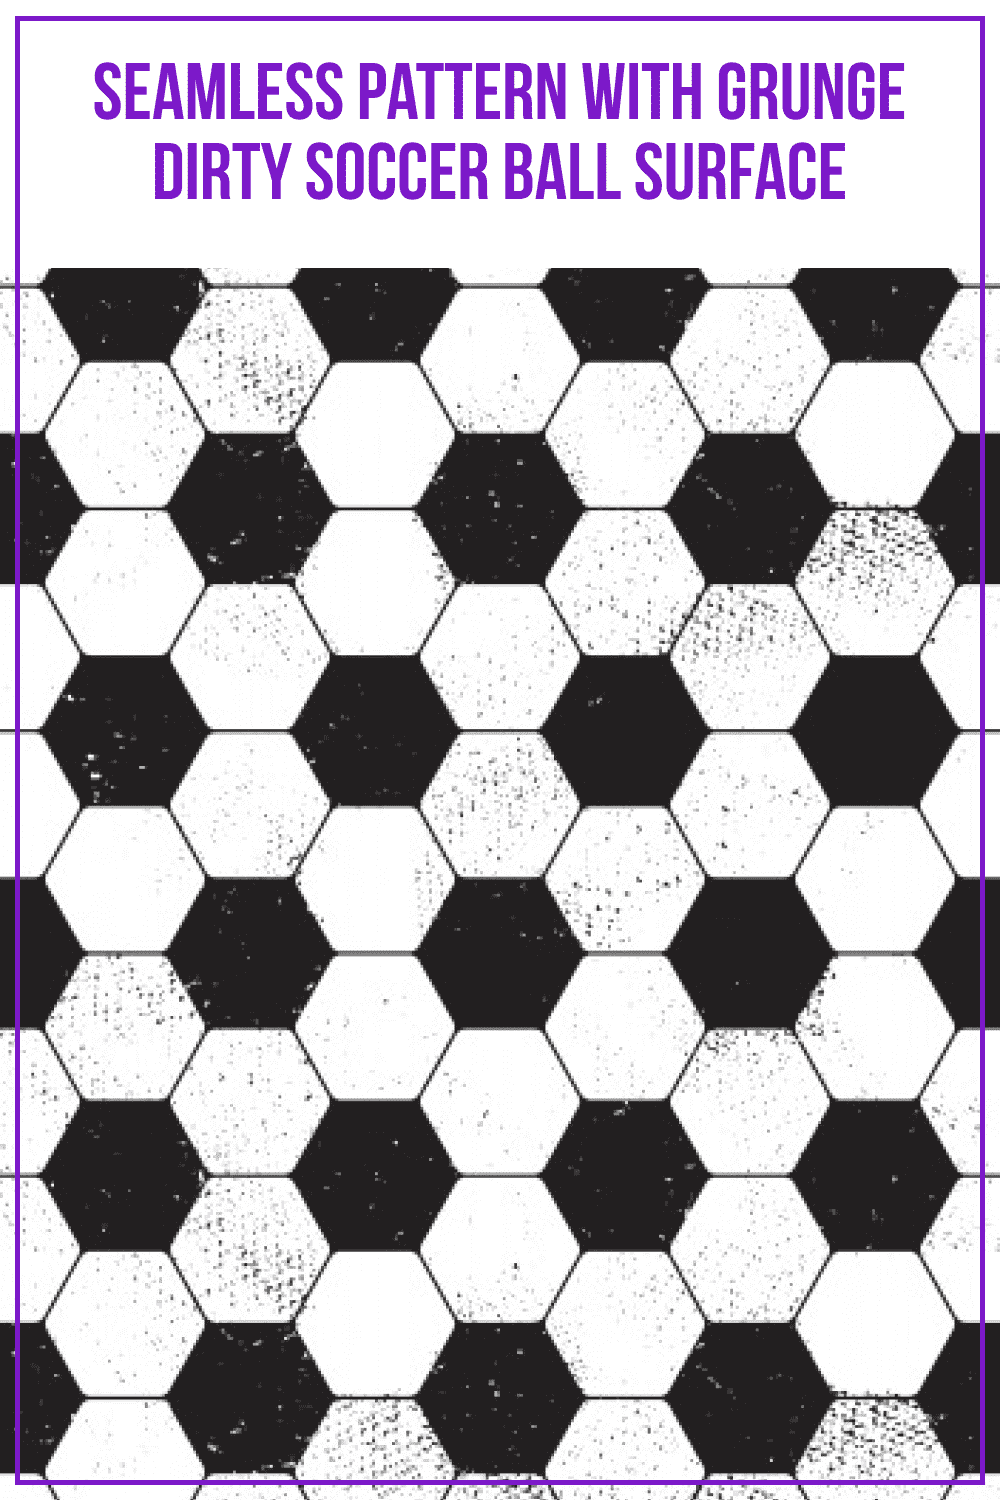 Seamless Pattern with Grunge Dirty Soccer Ball Surface.